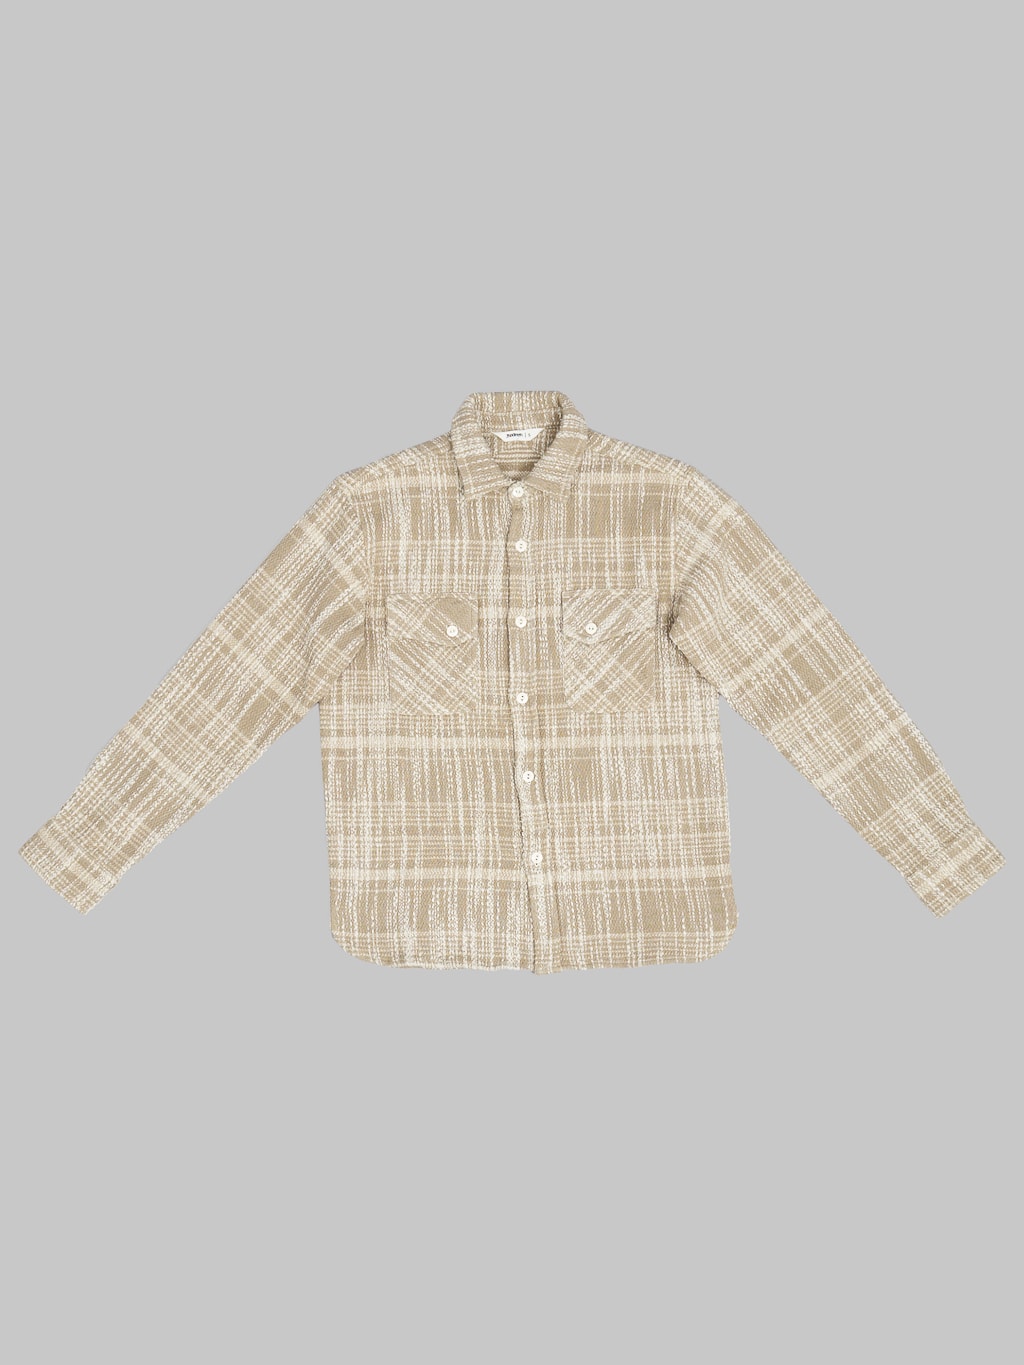 3sixteen Crosscut Flannel Alabaster Jacquard front view